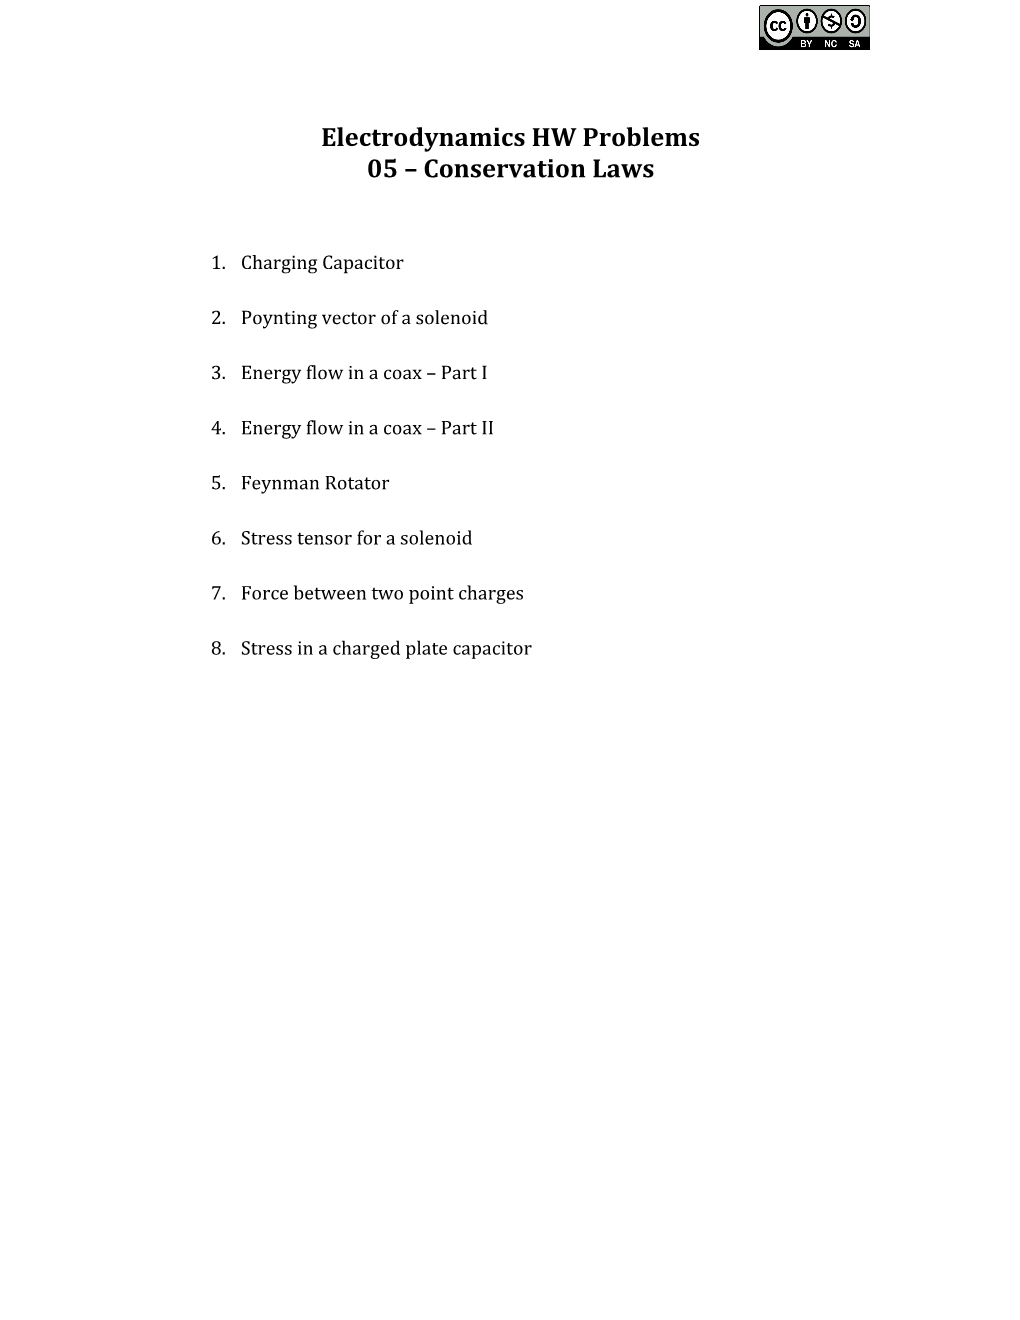 05 Conservation Laws